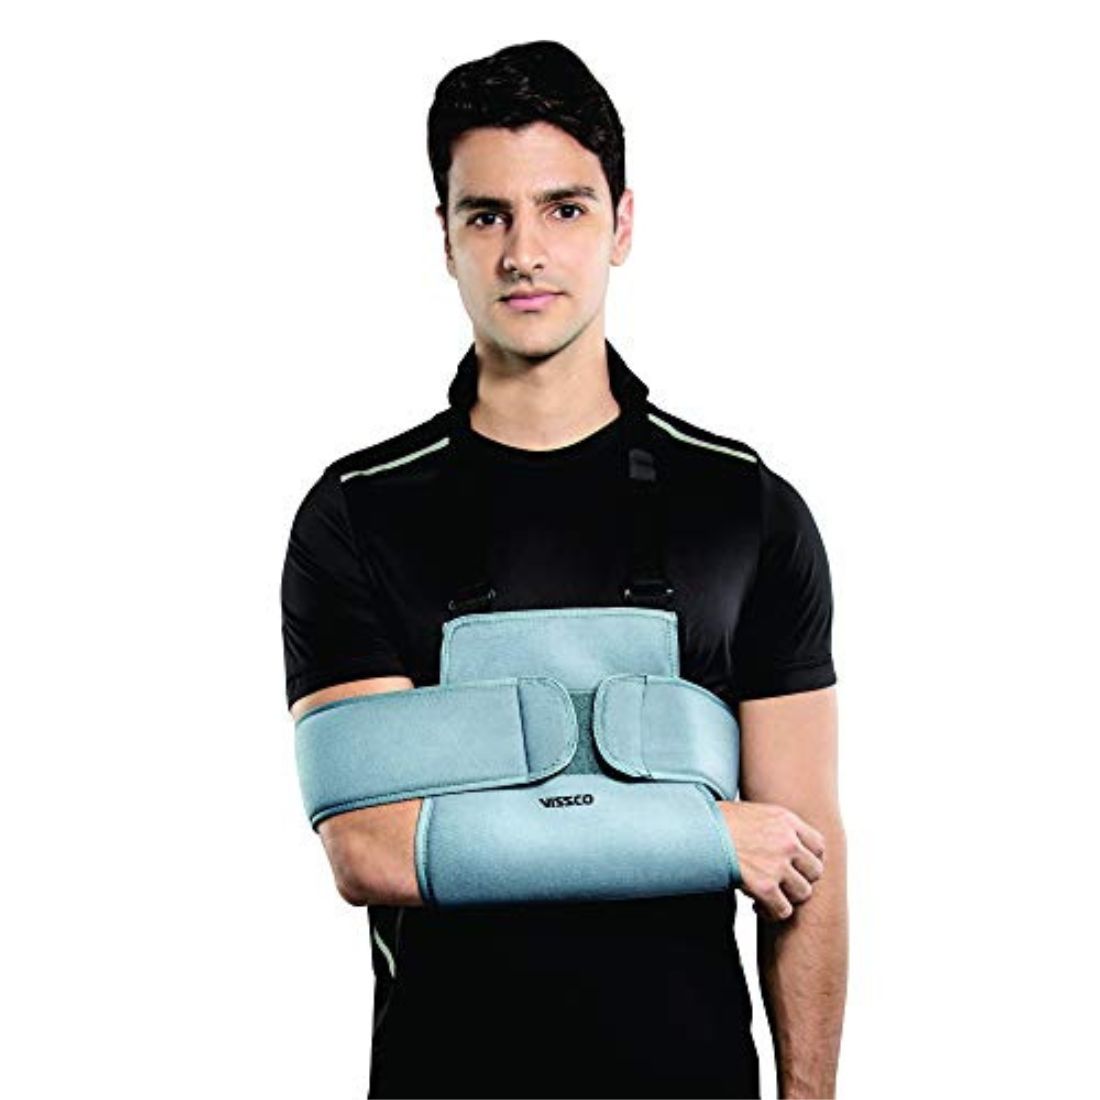 The shoulder immobilizer you have been given is designed to support your arm, but also to protect you from doing certain motions.